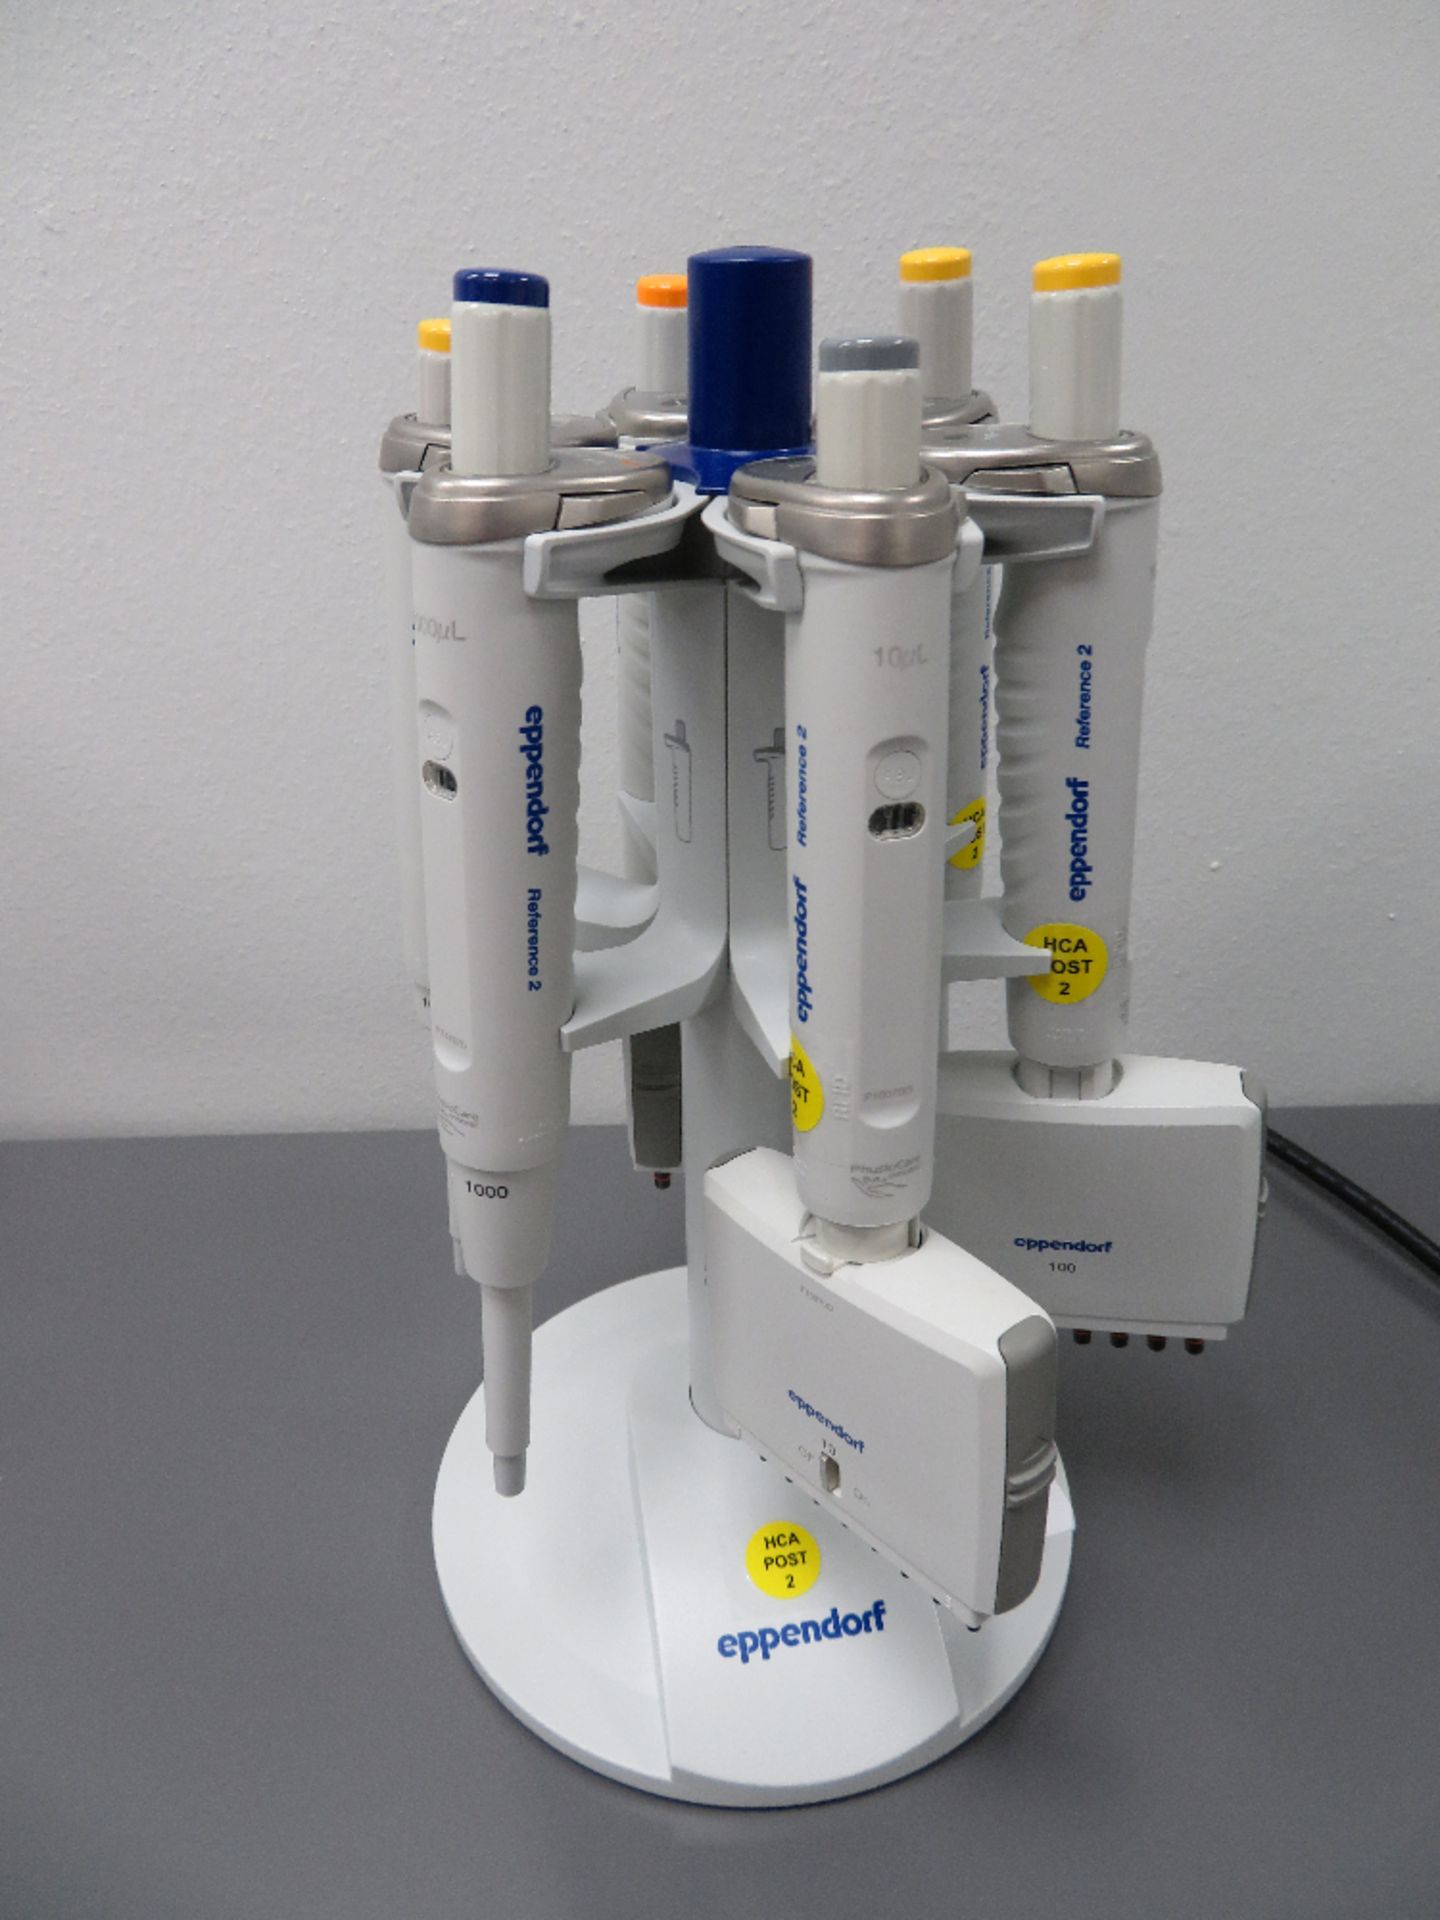 Eppendorf pipettes on carousel (3) 8 channel multichannel pipettes (3) Single channel pipettes